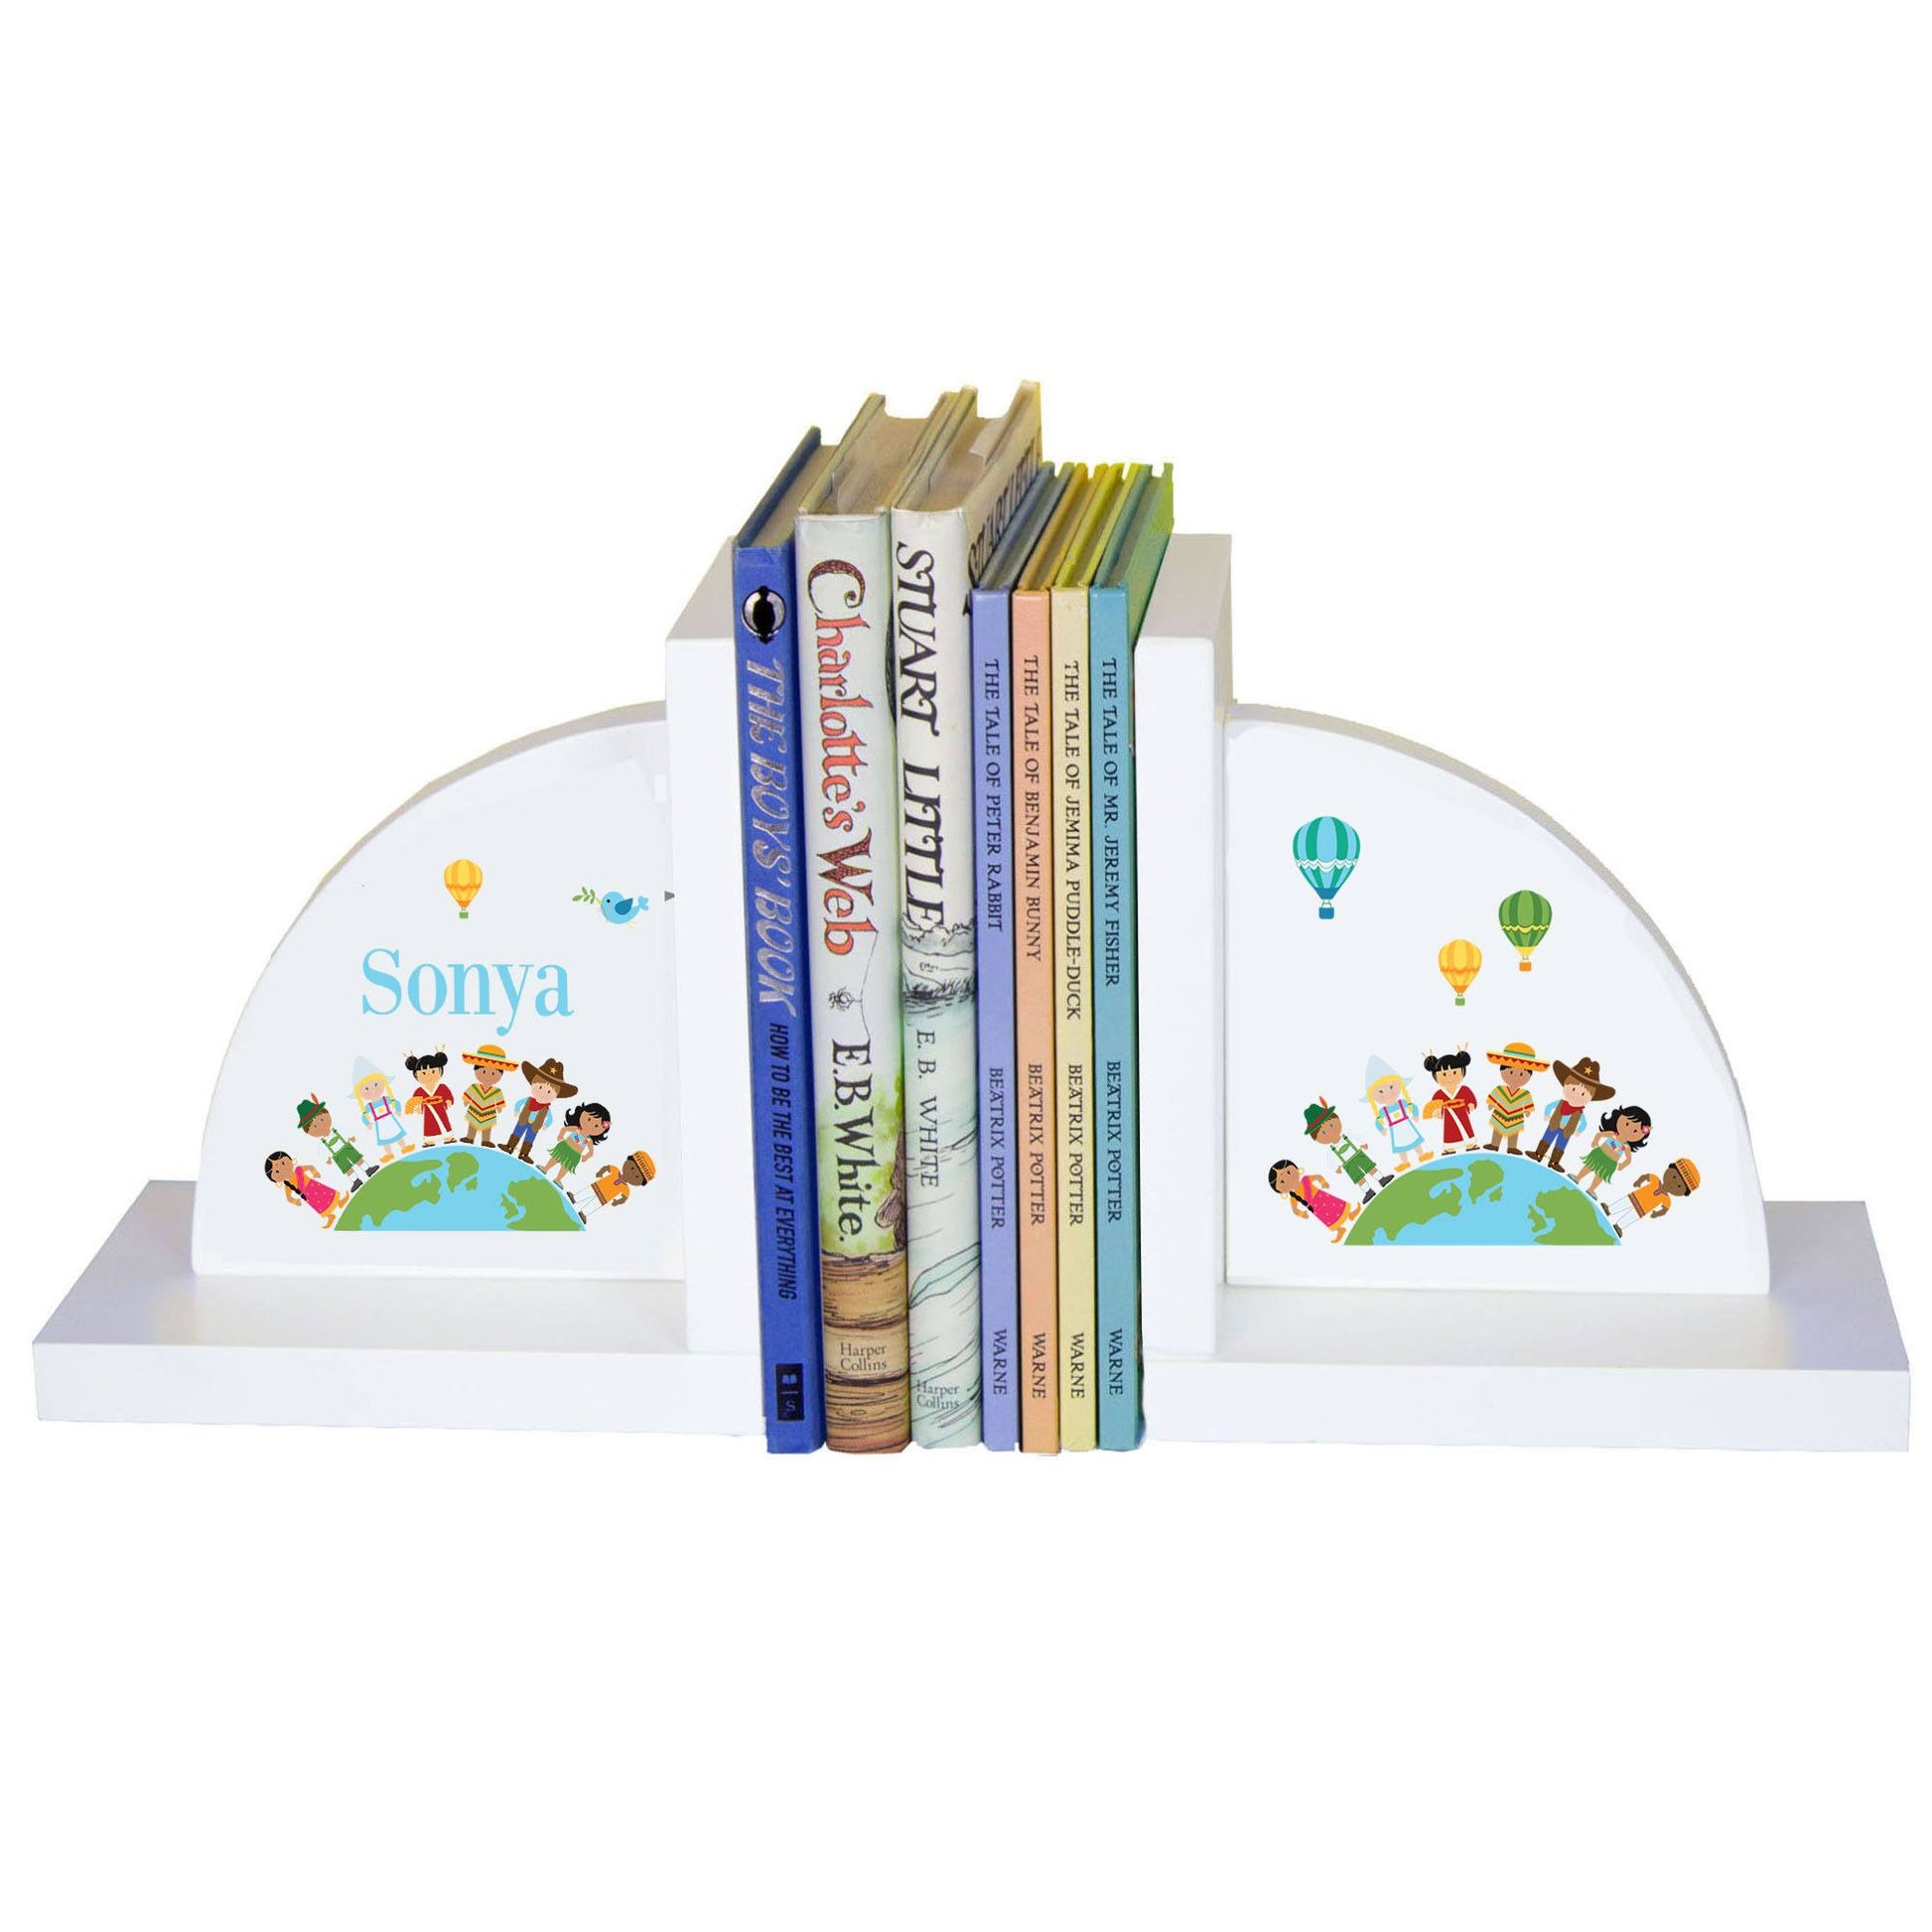 Personalized White Bookends with Small World design